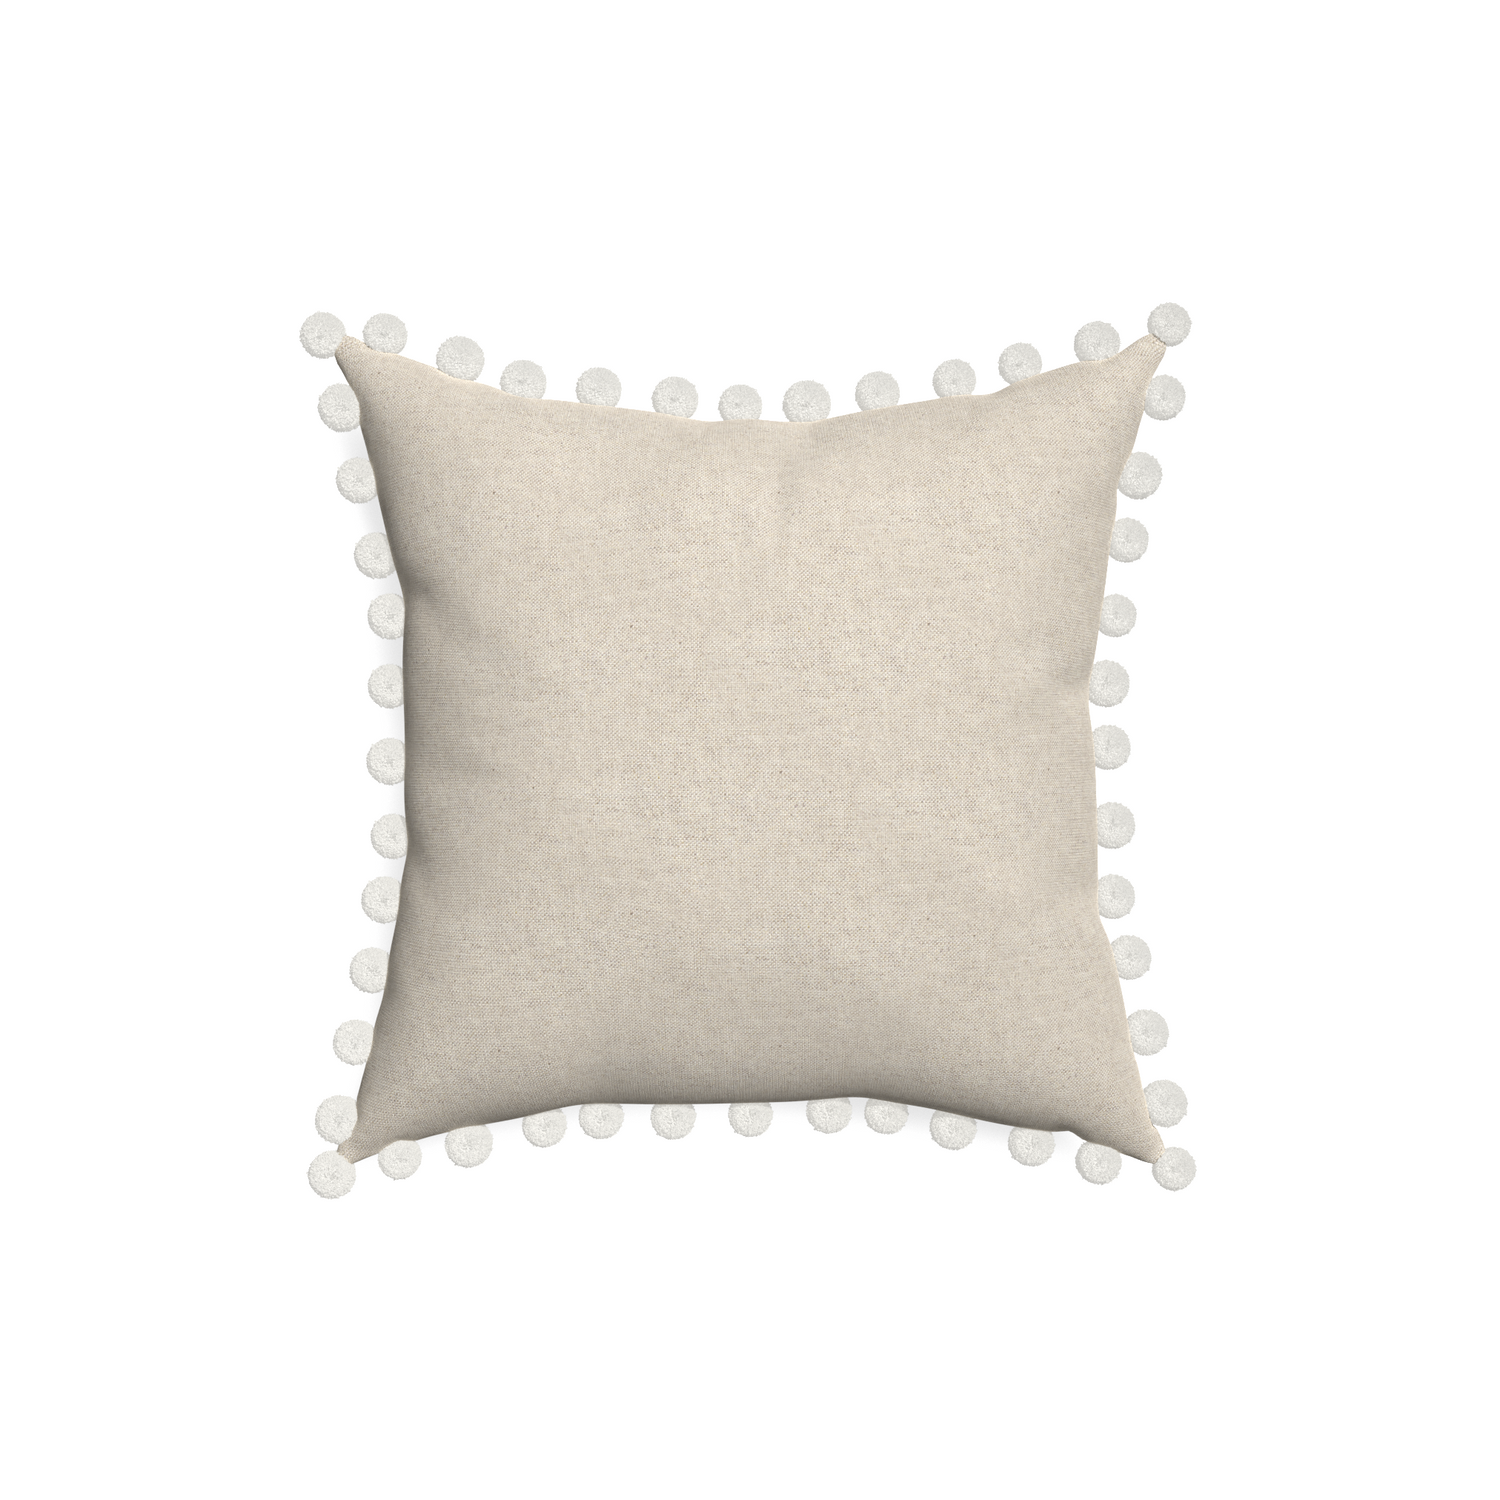 18-square oat custom pillow with snow pom pom on white background